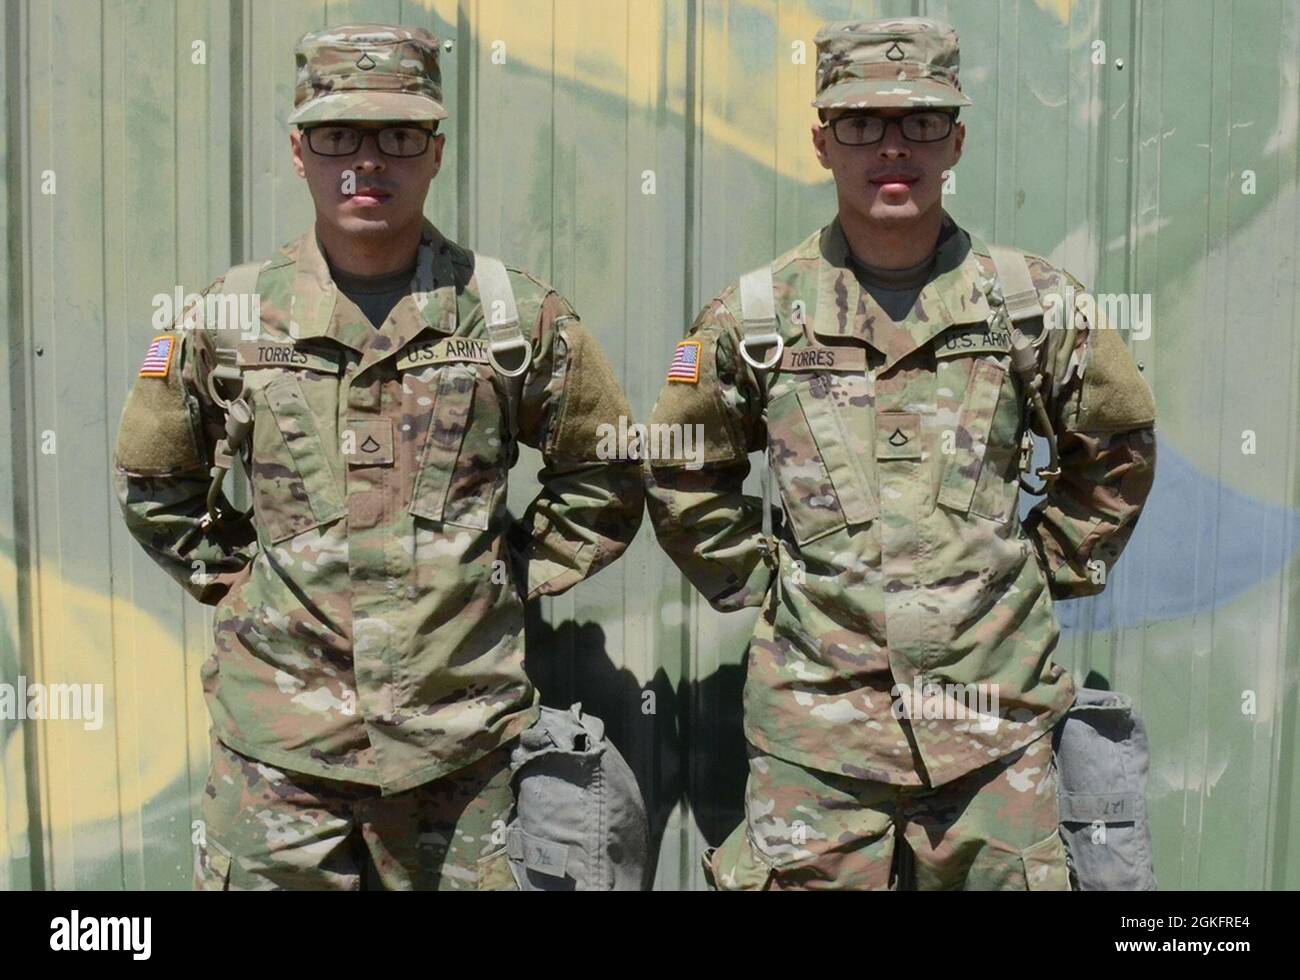 Pfcs. Luis Joel (left) and Luis Javier Torres Perez are twin brothers from Puerto Rico assigned to Company C, 35th Engineer Battalion, for One Station Unit Training here. While they have a family tradition of military service — their father and grandfather each served in the Army — the siblings decided to join the Army together after seeing the support National Guard Soldiers provided after the Category 5 Hurricane Maria 'destroyed our island' in September 2017. Stock Photo